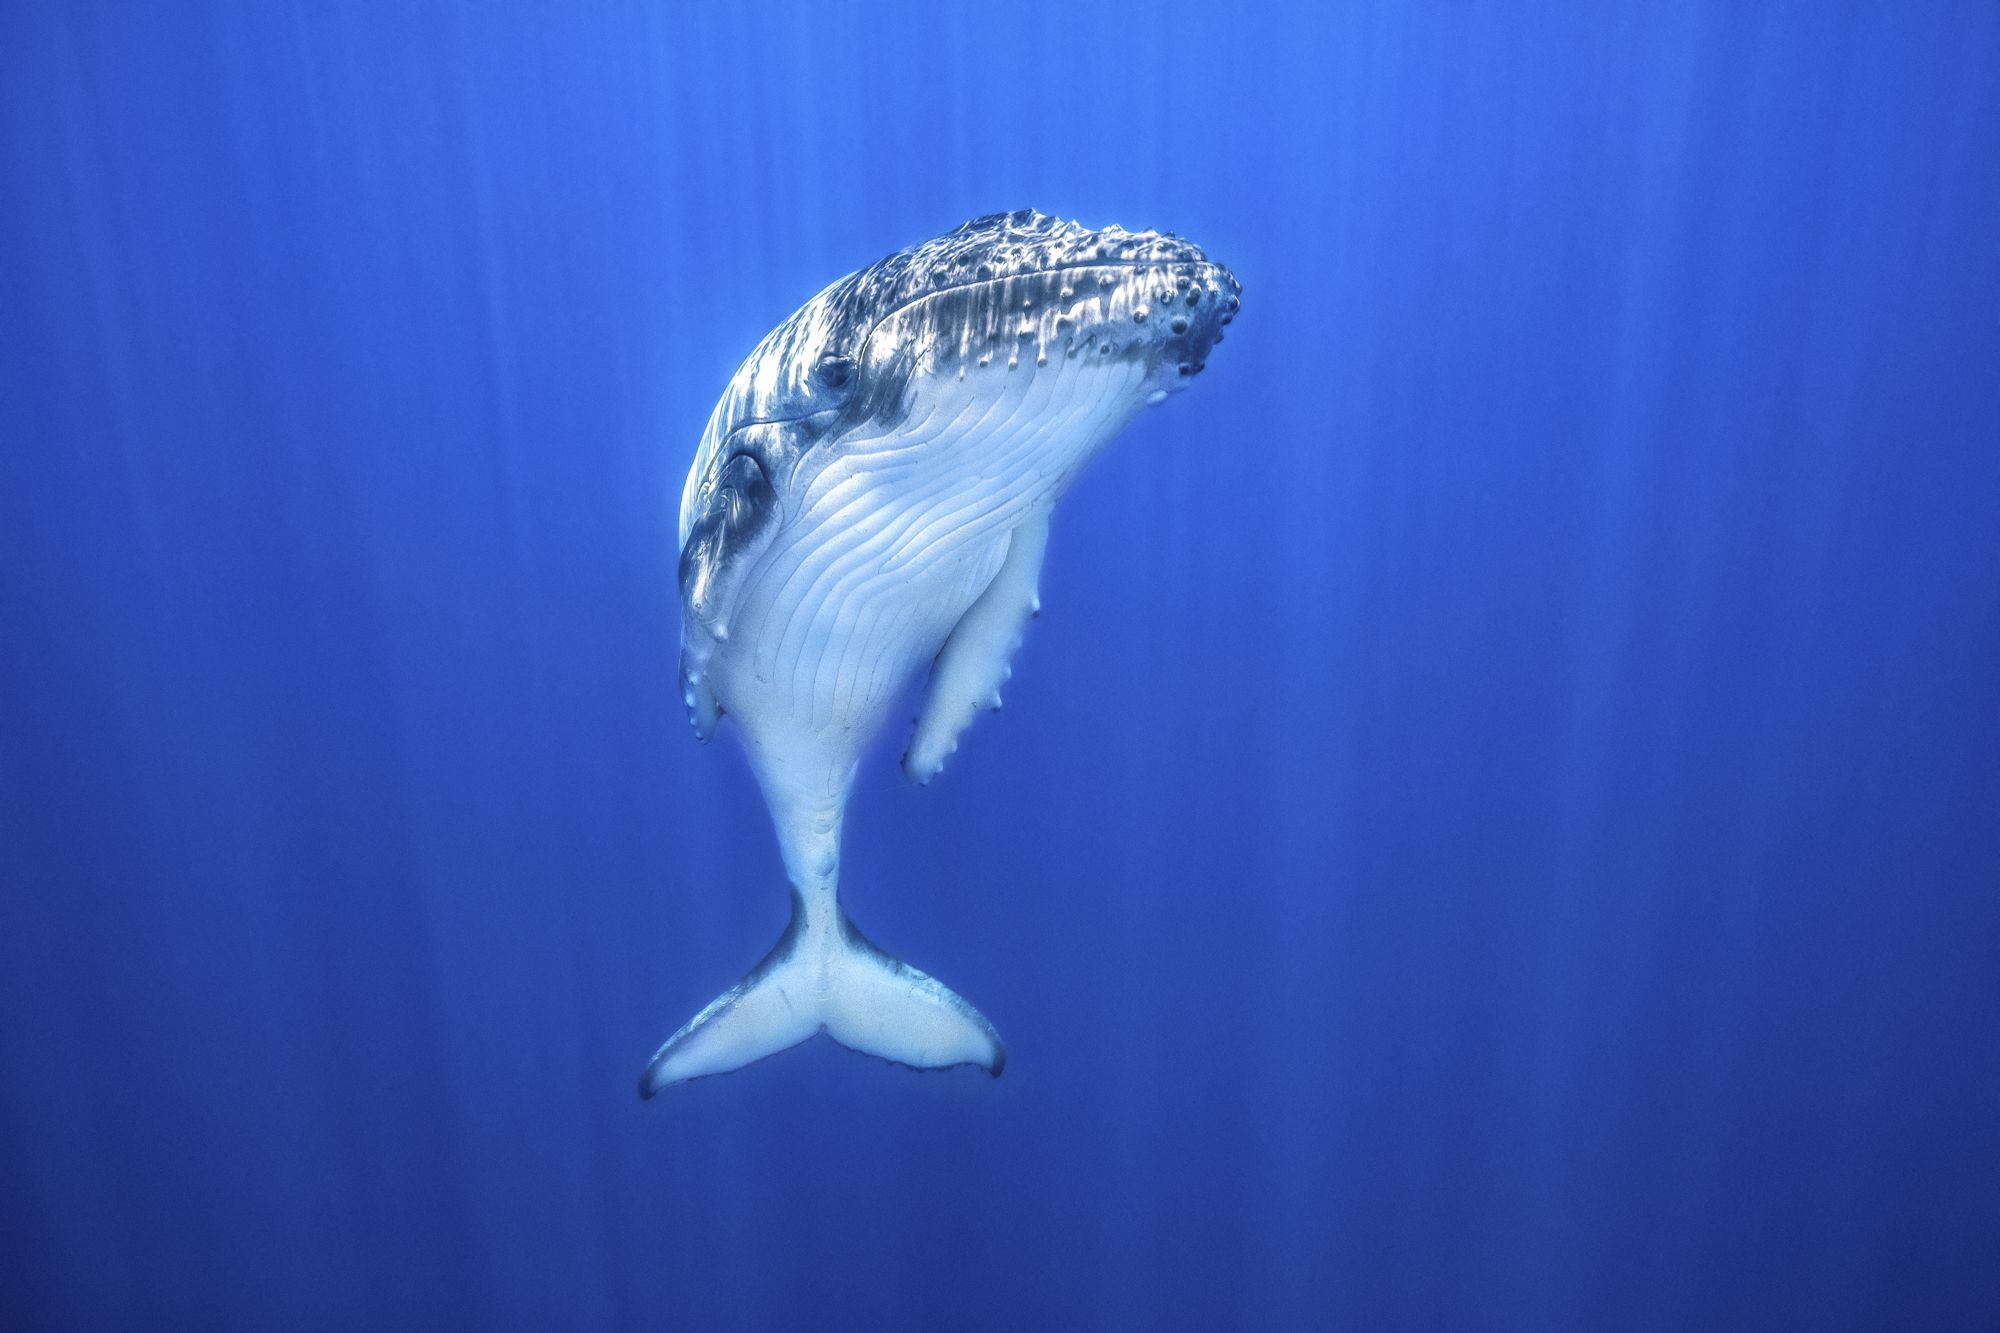 Humpback Whale Image | National Geographic Your Shot Photo of the Day